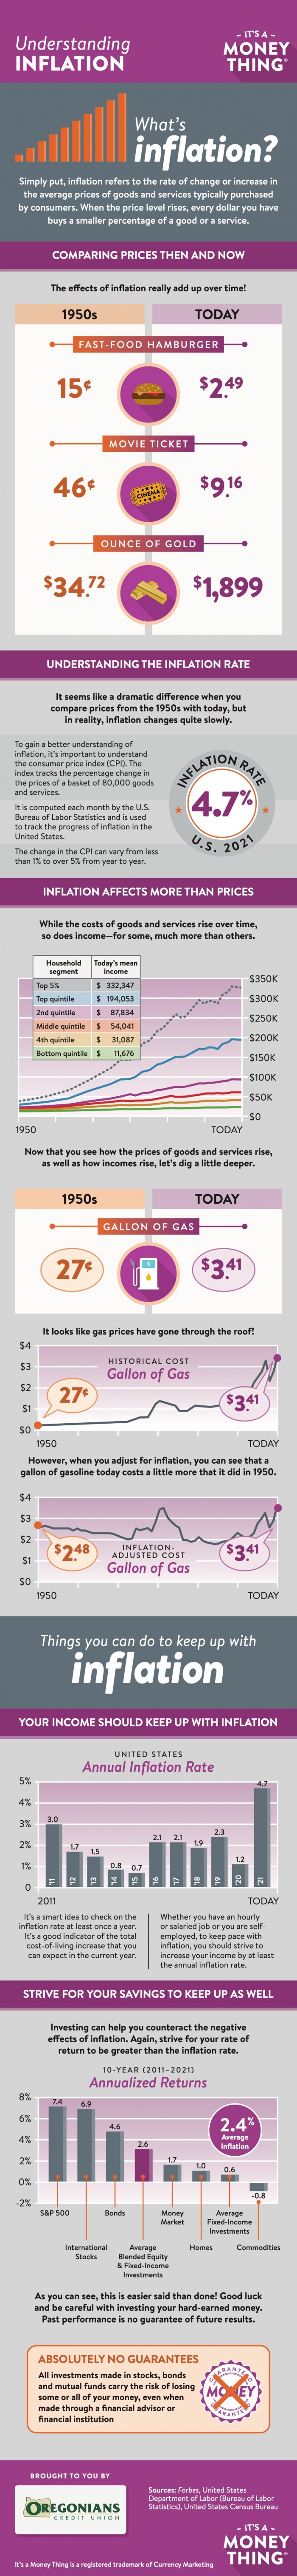 Inflation Infographic